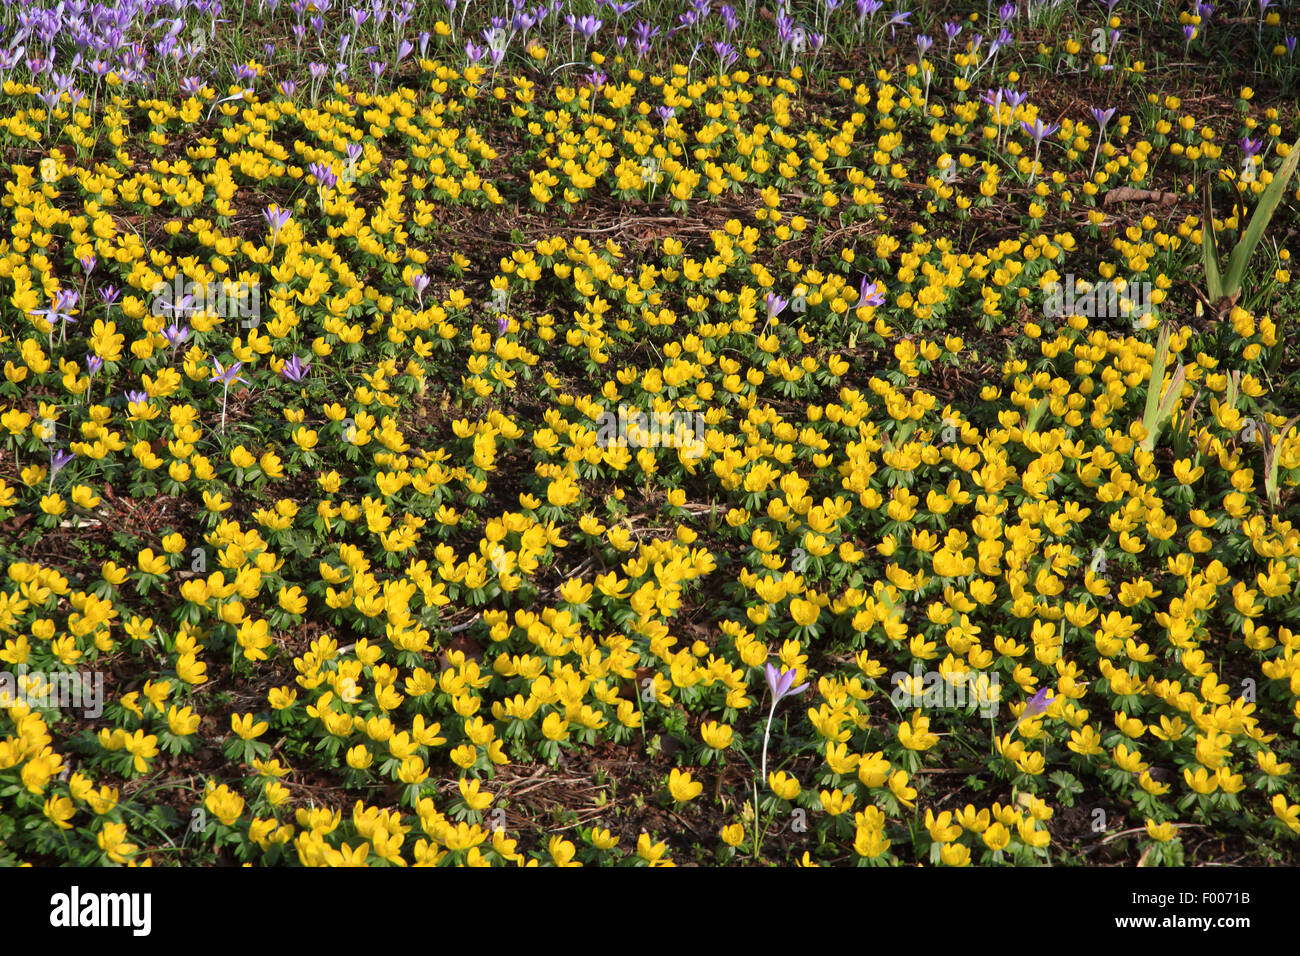 winter aconite (Eranthis hyemalis), with crocuses in a garden, Germany Stock Photo